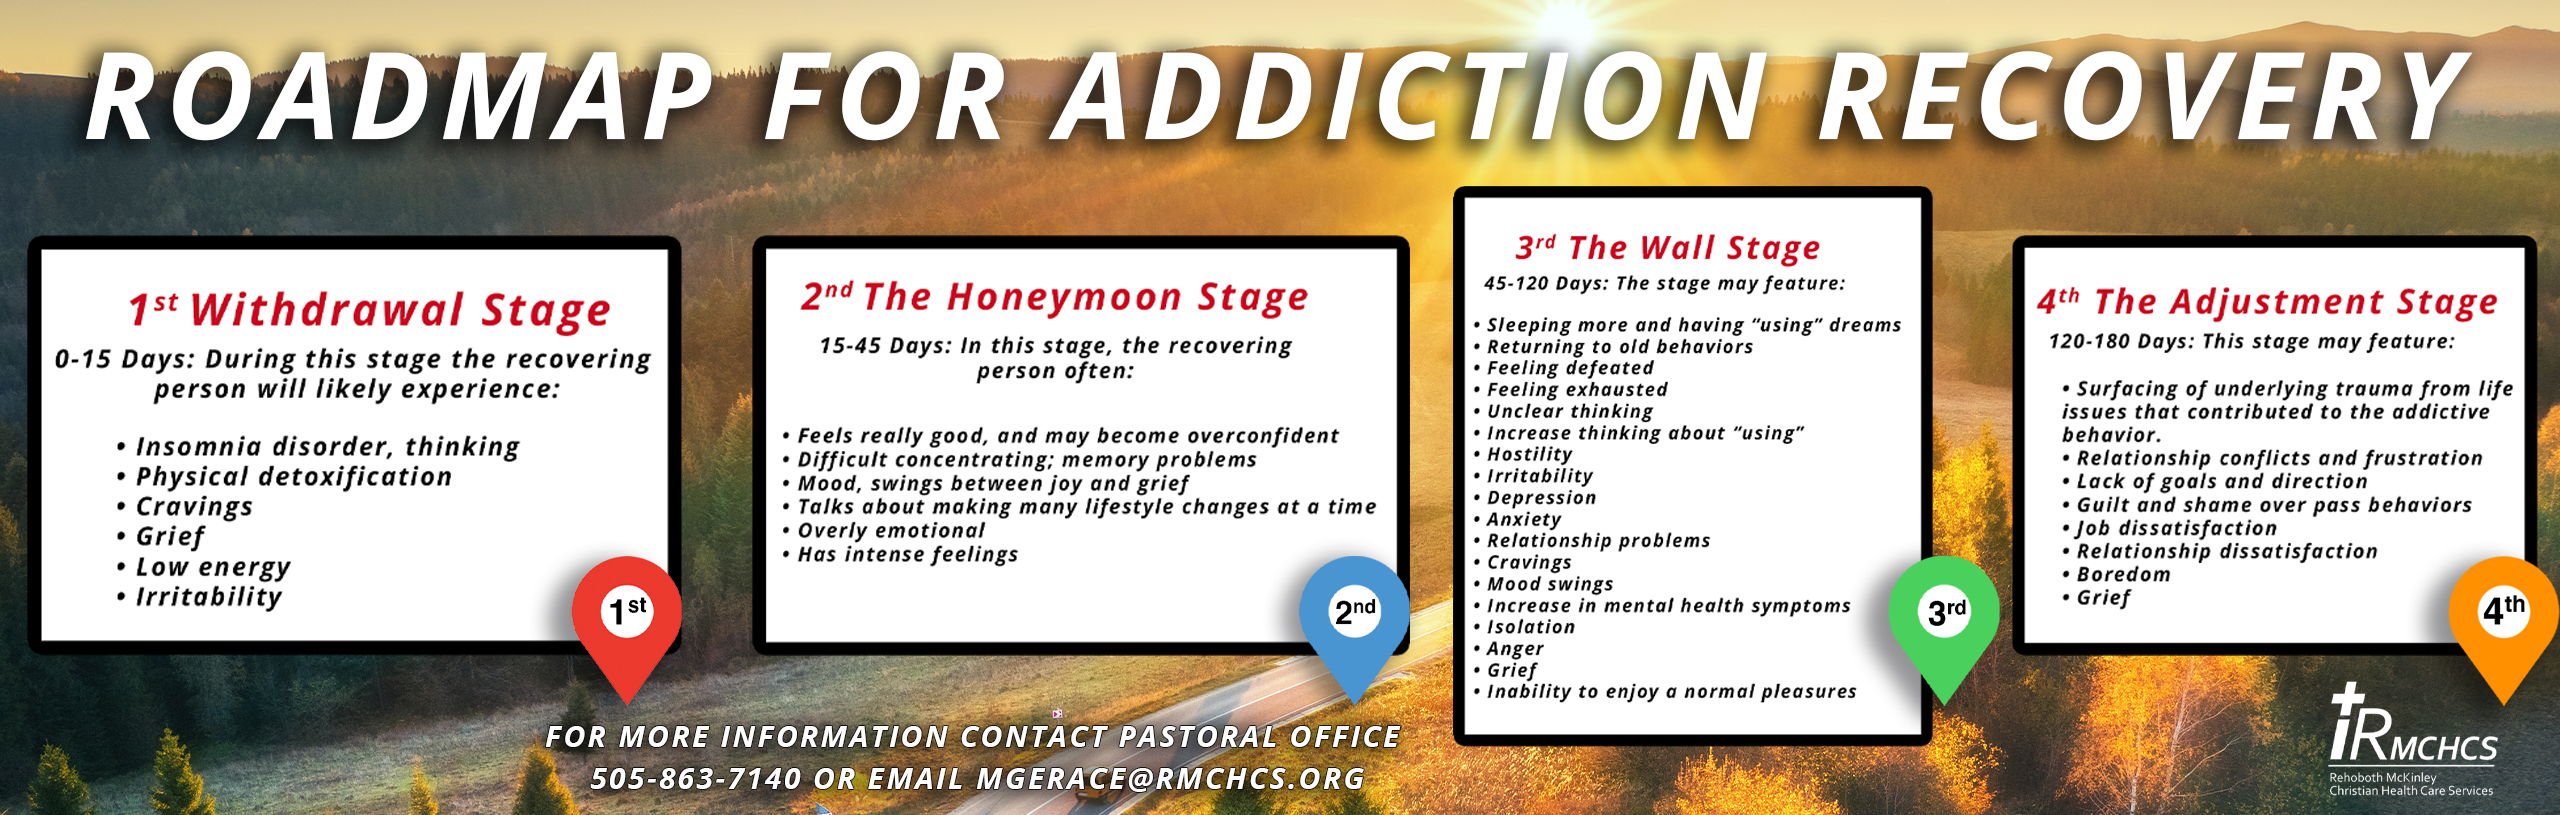 ROADMAP FOR ADDICTION RECOVERY 

1st Withdrawal Stage
0-15 Days: During this stage the recovering person will likely experience:

- Insomnia disorder. thinking
- Physical detoxification
- Cravings
-Grief
- Low Energy
- Irritability 

2nd The Honeymoon Stage
15-45 Days: In this stage, the recovering person often:

- Feels really good, and may become overconfident 
- Difficulty concentrating: memory problems
- Mood, swings between joy and grief 
- Talks about making many lifestyle changes at a time 
- Overly emotional
- Has intense feelings

3rd The Wall Stage
45-120 Days: The Stage may feature:
- Sleeping more and having "using" dreams
- Returning to old behaviors
- Feeling defeated
- Feeling exhausted
- Unclear thinking
- Increase thinking about "using"
- Hostility 
- Irritability
- Depression
- Anxiety 
- Relationship problems
- Cravings
- Mood Swings
- Increase in mental health symptoms
- Isolation
- Anger
- Grief
- Inability to enjoy a normal pleasures

4th The Adjustment Stage
120-180 Days: This Stage may feature:
-Surfacing of underlying trauma from life issues that contributed to the addictive behavior.
- Relationship conflicts and frustration
- Lack of goals and direction
- Guilt and shame over pass behaviors 
- Job dissatisfaction
- Relationship dissatisfaction
- Boredom
- Grief 


For More Information- contact:
Pastoral office 
505-863-7140 or e-mail Mgerace@rmchcs/org